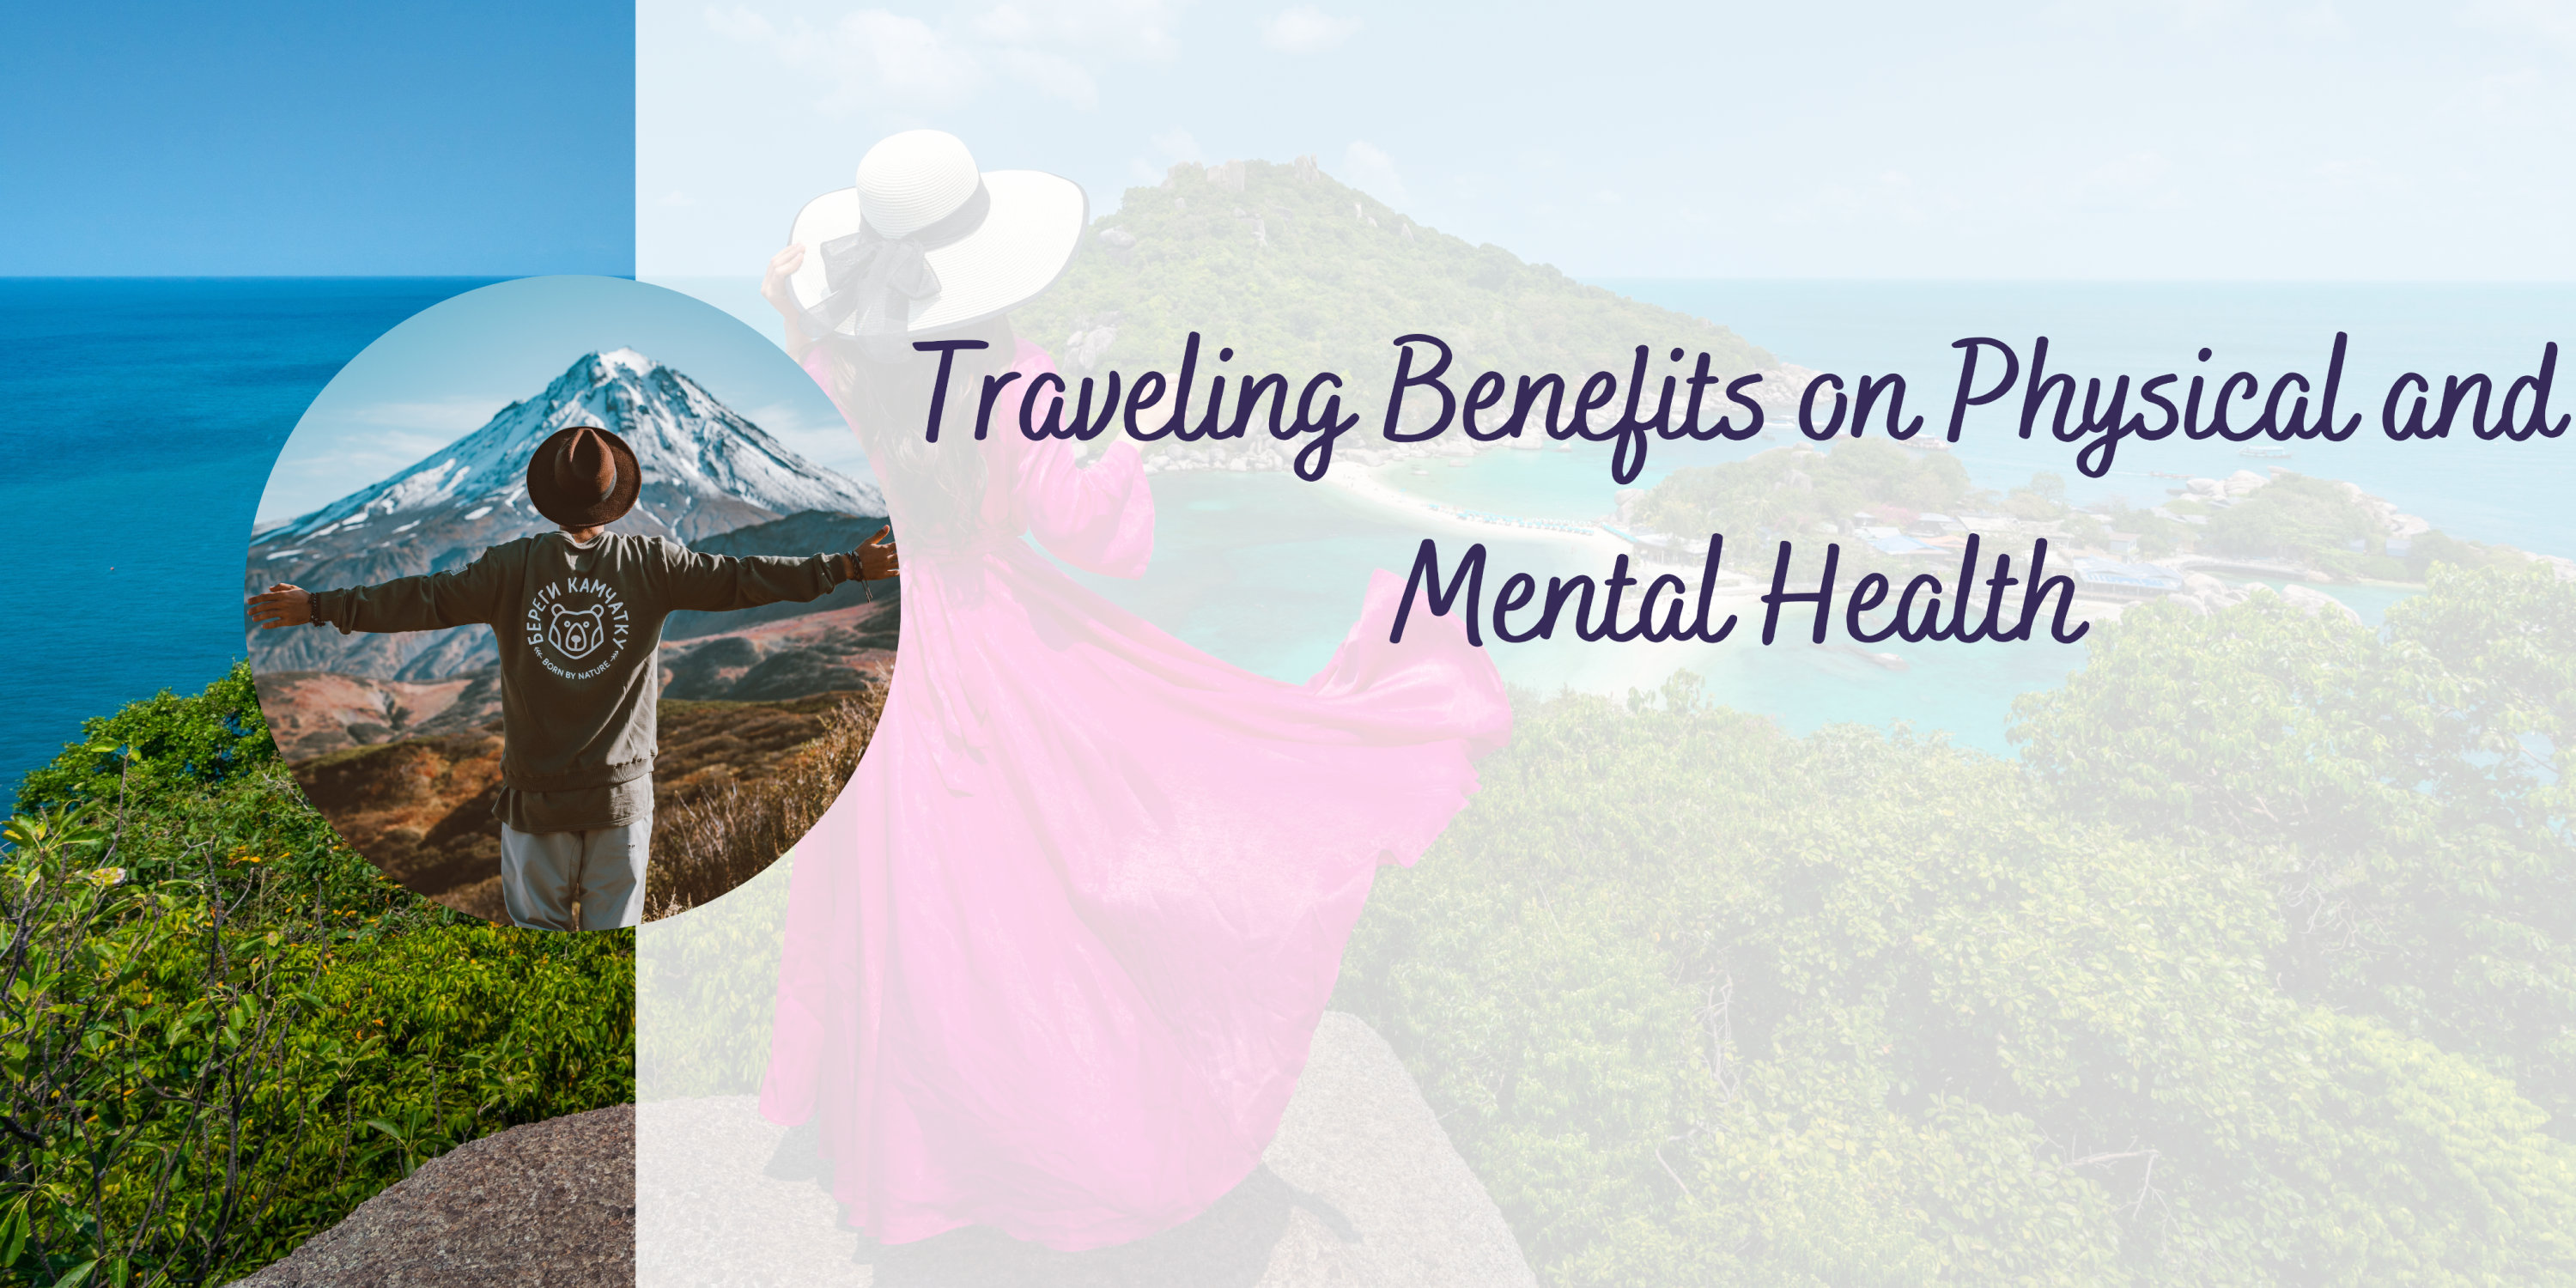 Traveling Benefits on Physical and Mental Health